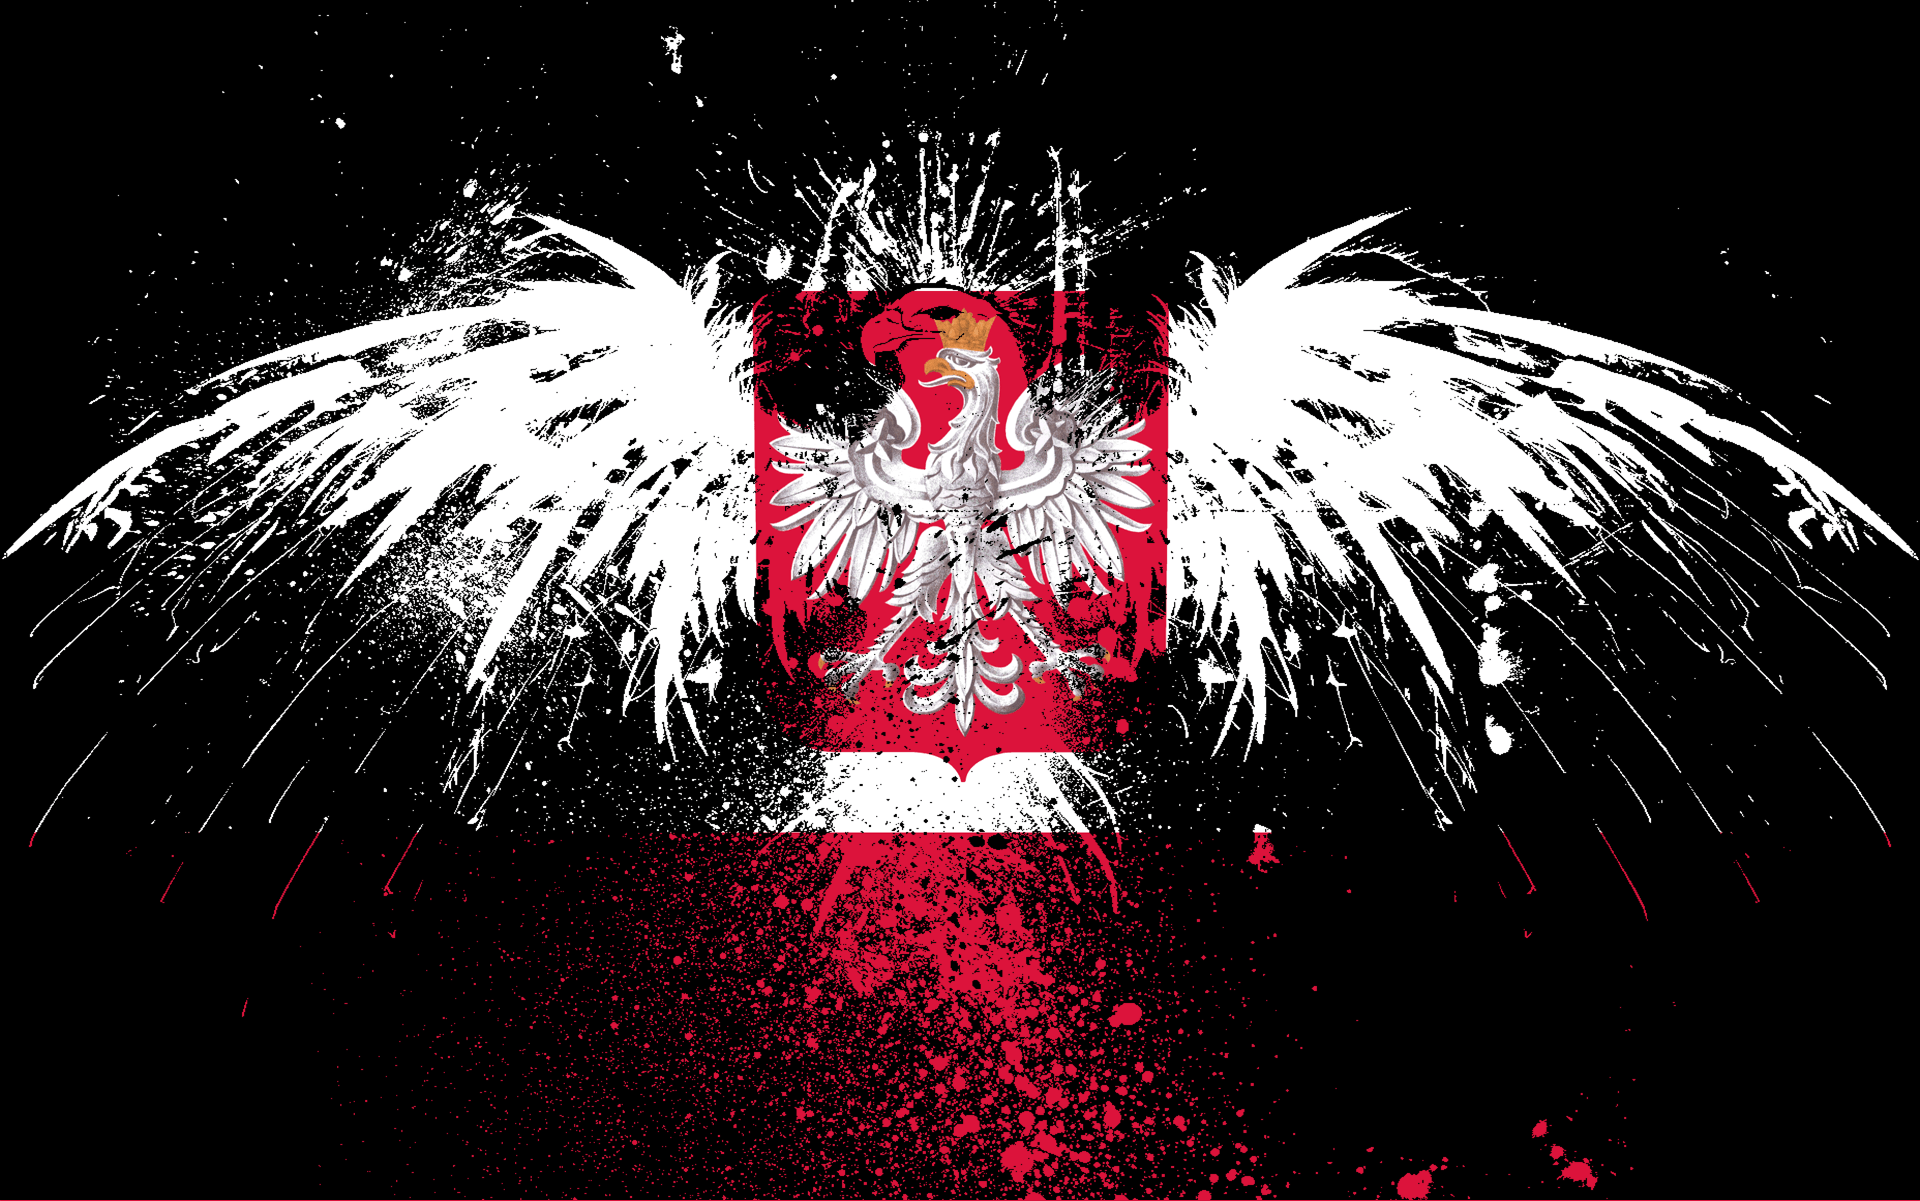 Polish Flag Images  Free Photos PNG Stickers Wallpapers  Backgrounds   rawpixel